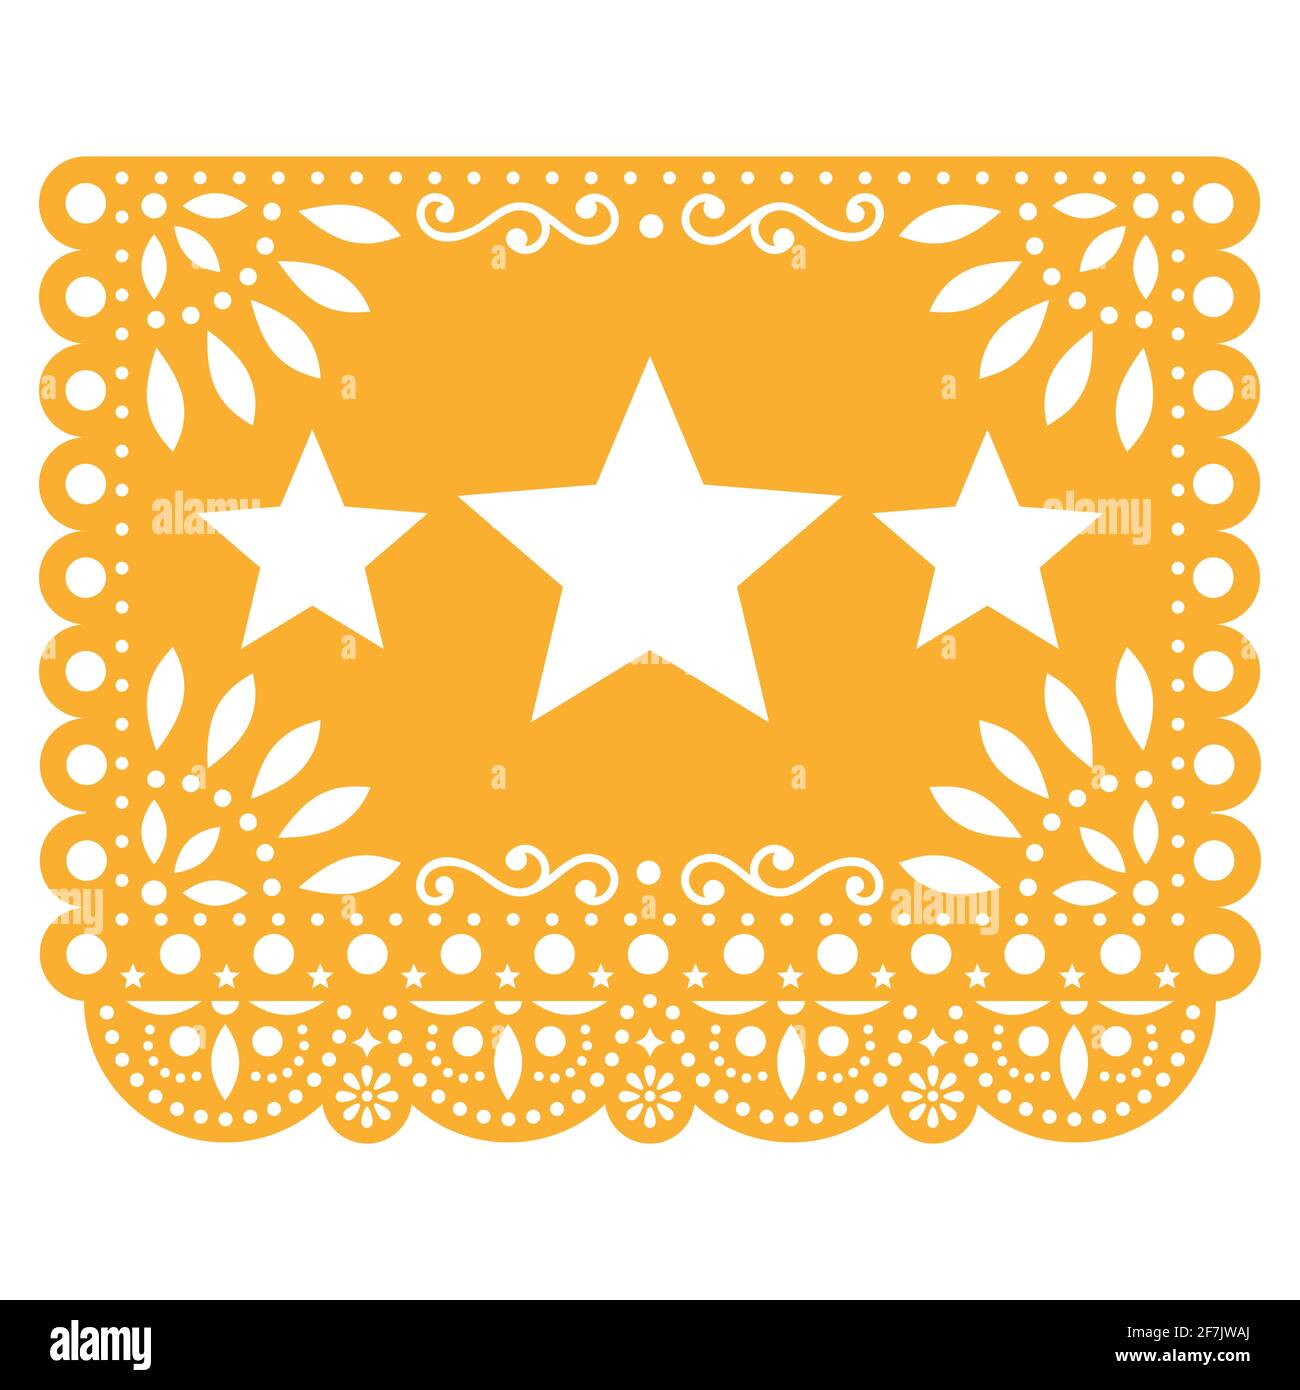 Papel Picado vector design with three stars in yellow, Mexican paper decoration with flowers and geometric shapes Stock Vector